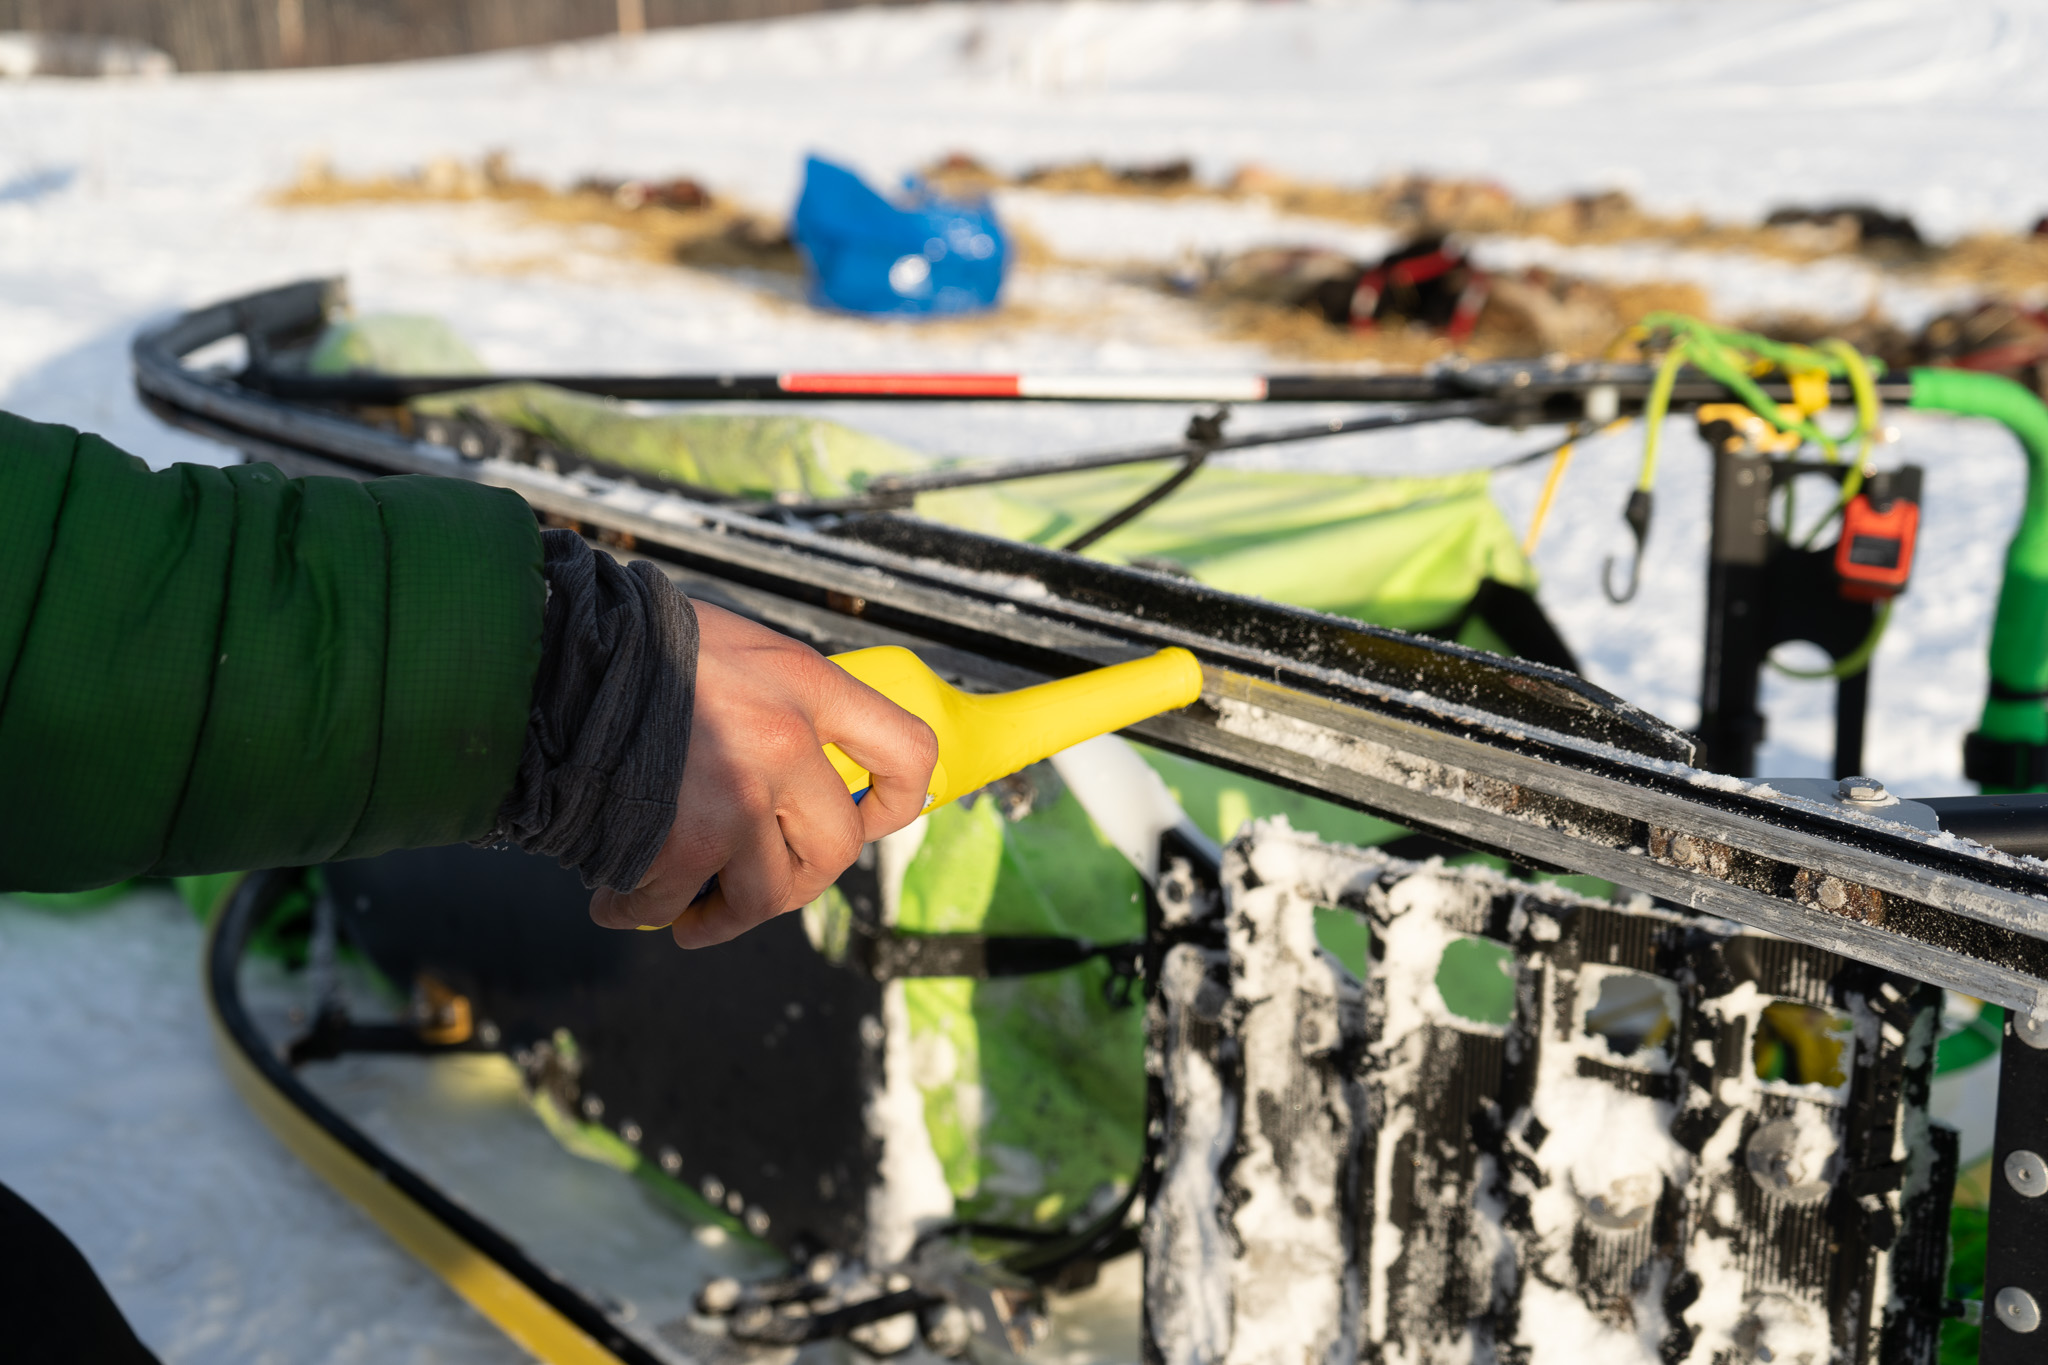 A person's hand applies a yellow container to a dog sled